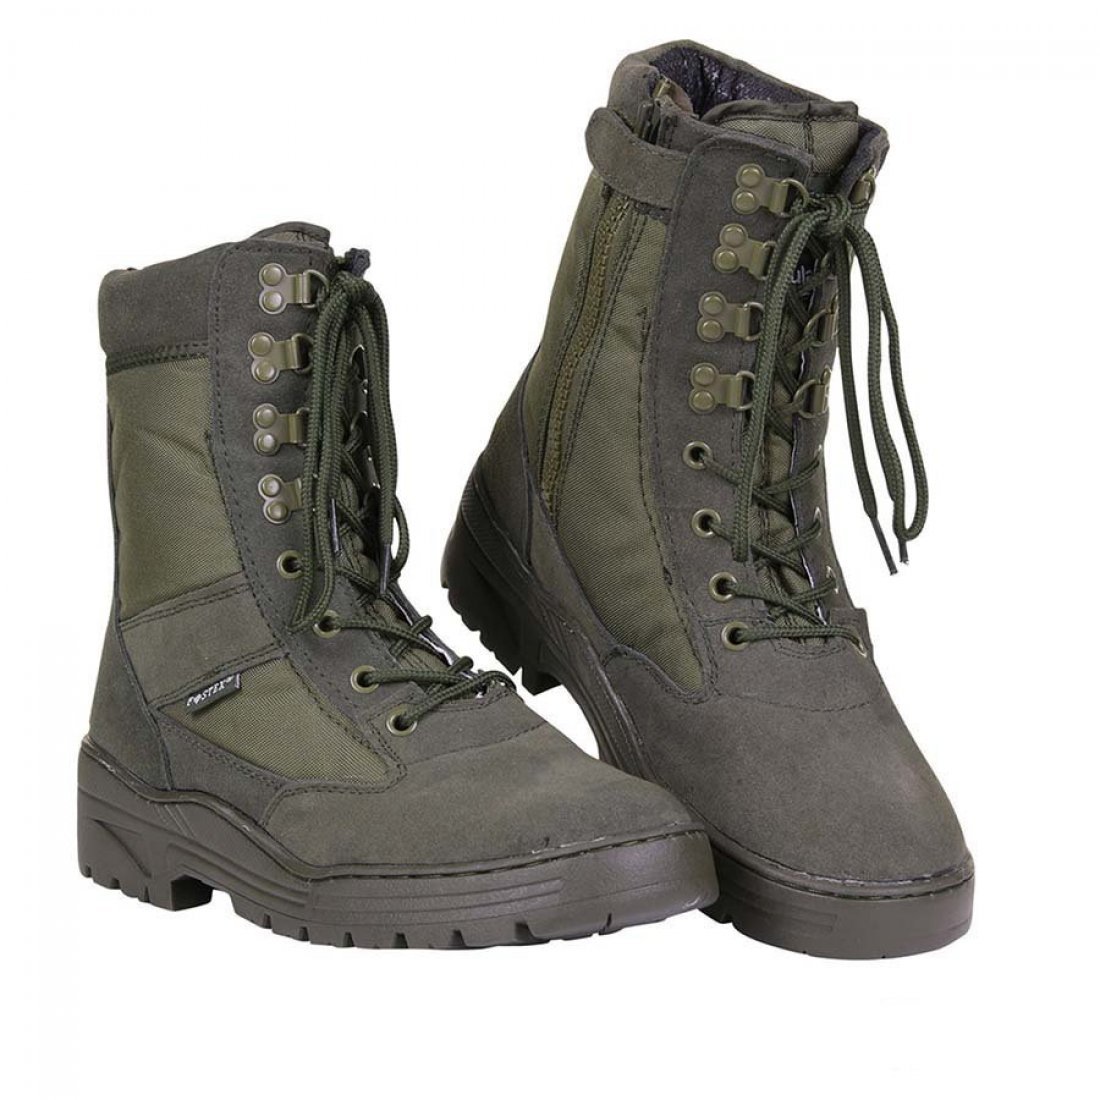 Buy Fostex Sniper Boots With Ykk Zipper On The Side | Outdoor & Military